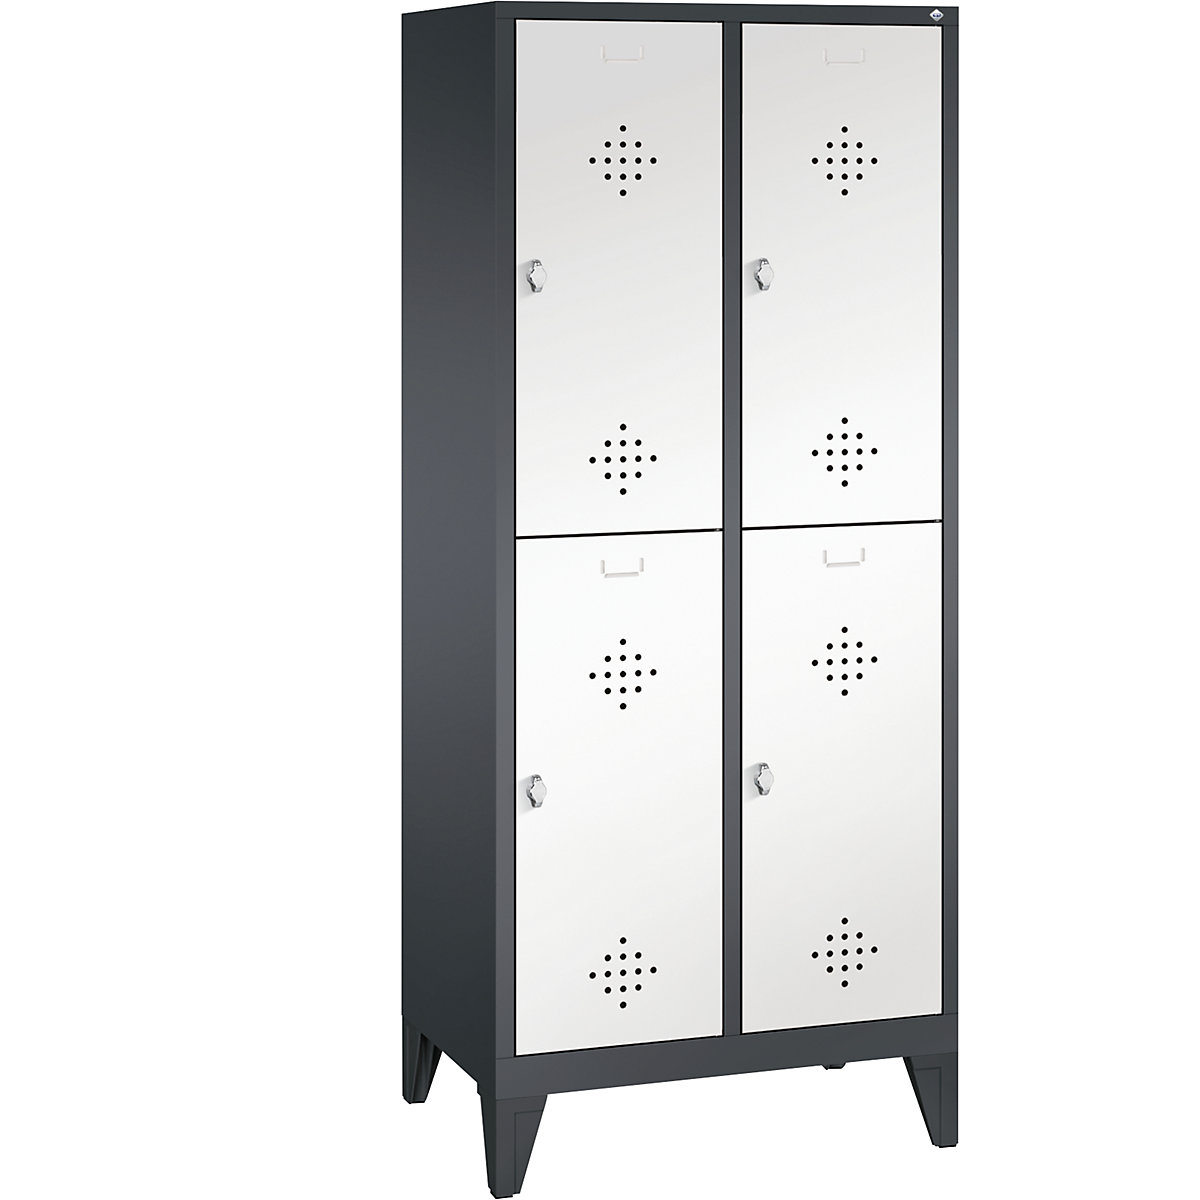 CLASSIC cloakroom locker with feet, double tier – C+P, 2 compartments, 2 shelf compartments each, compartment width 400 mm, black grey / traffic white-12